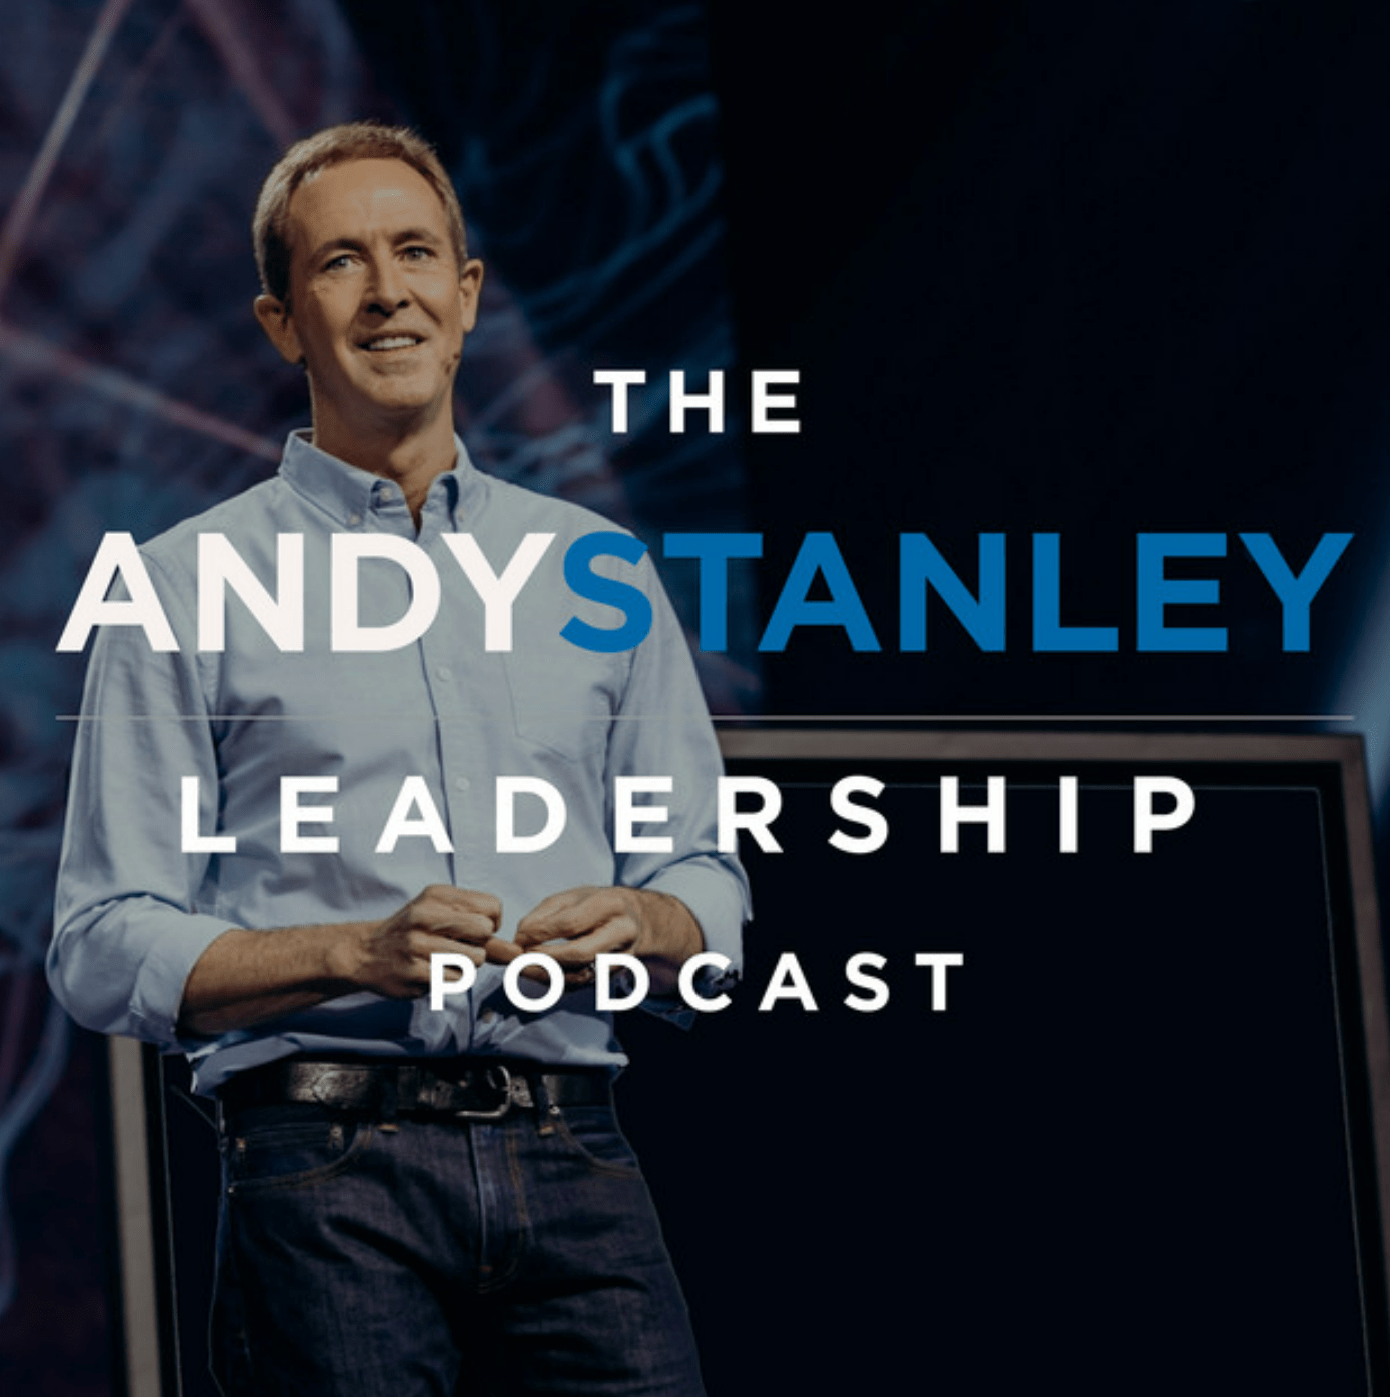 The Andy Stanley podcast poster